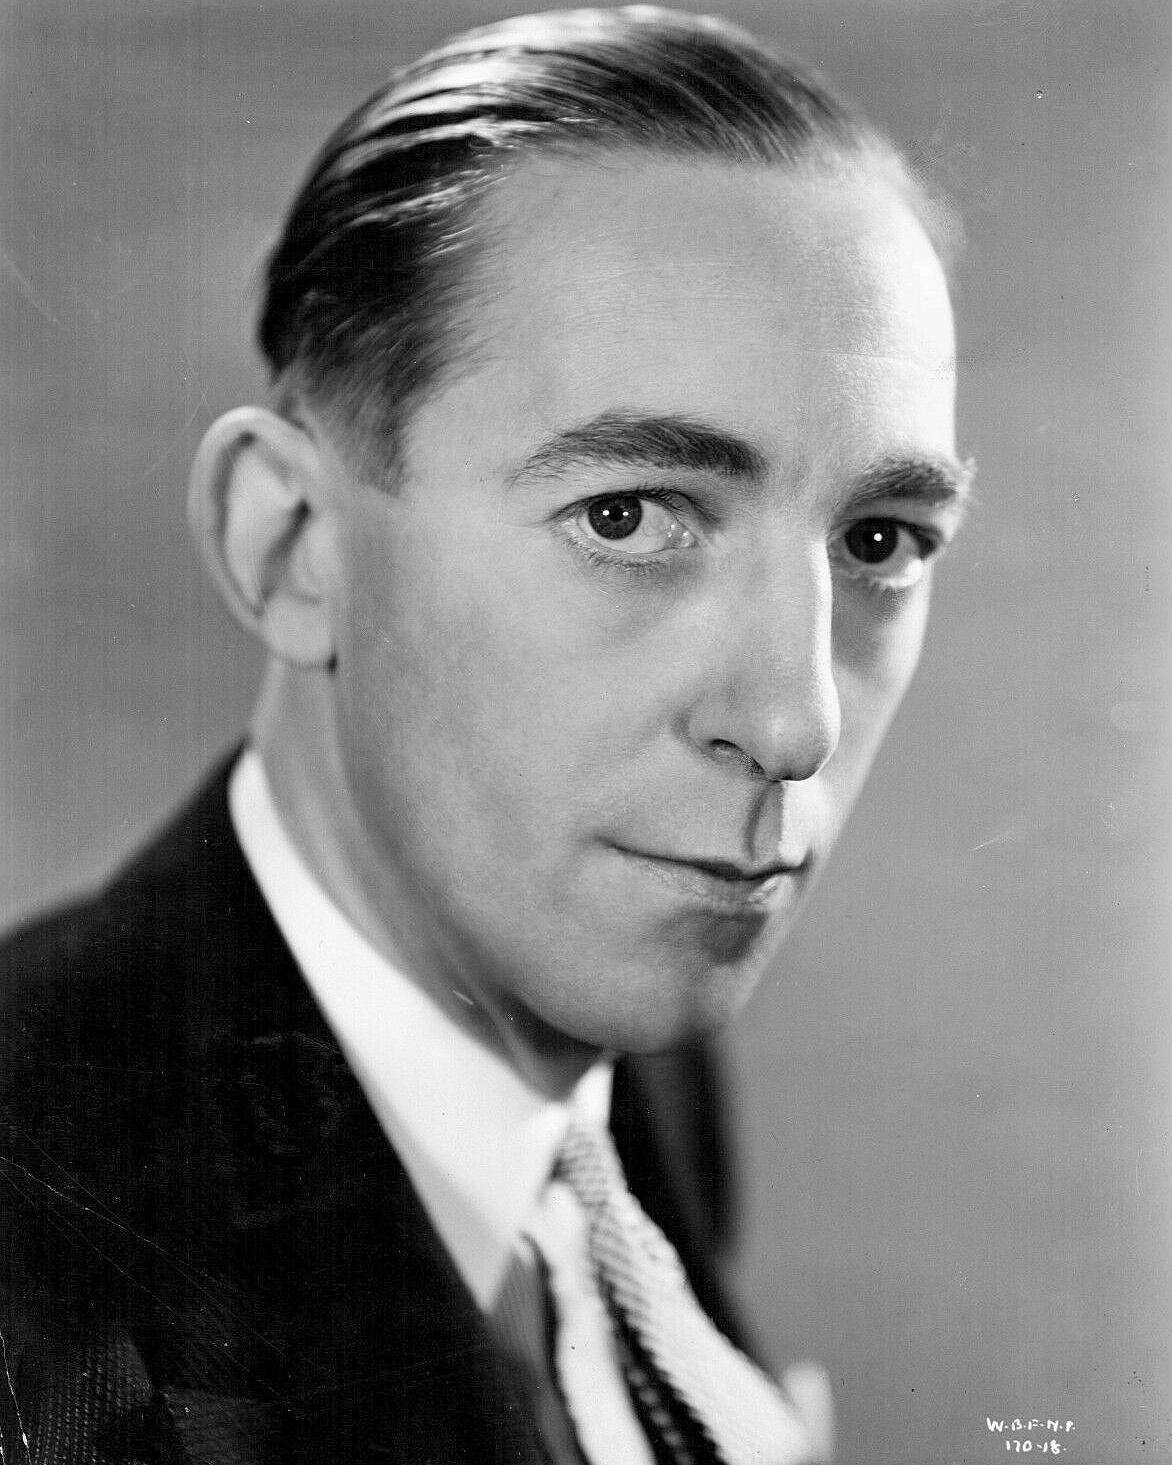 Photograph of British actor, Claude Hulbert, from the 1935 film The Butter and Egg Man (1)